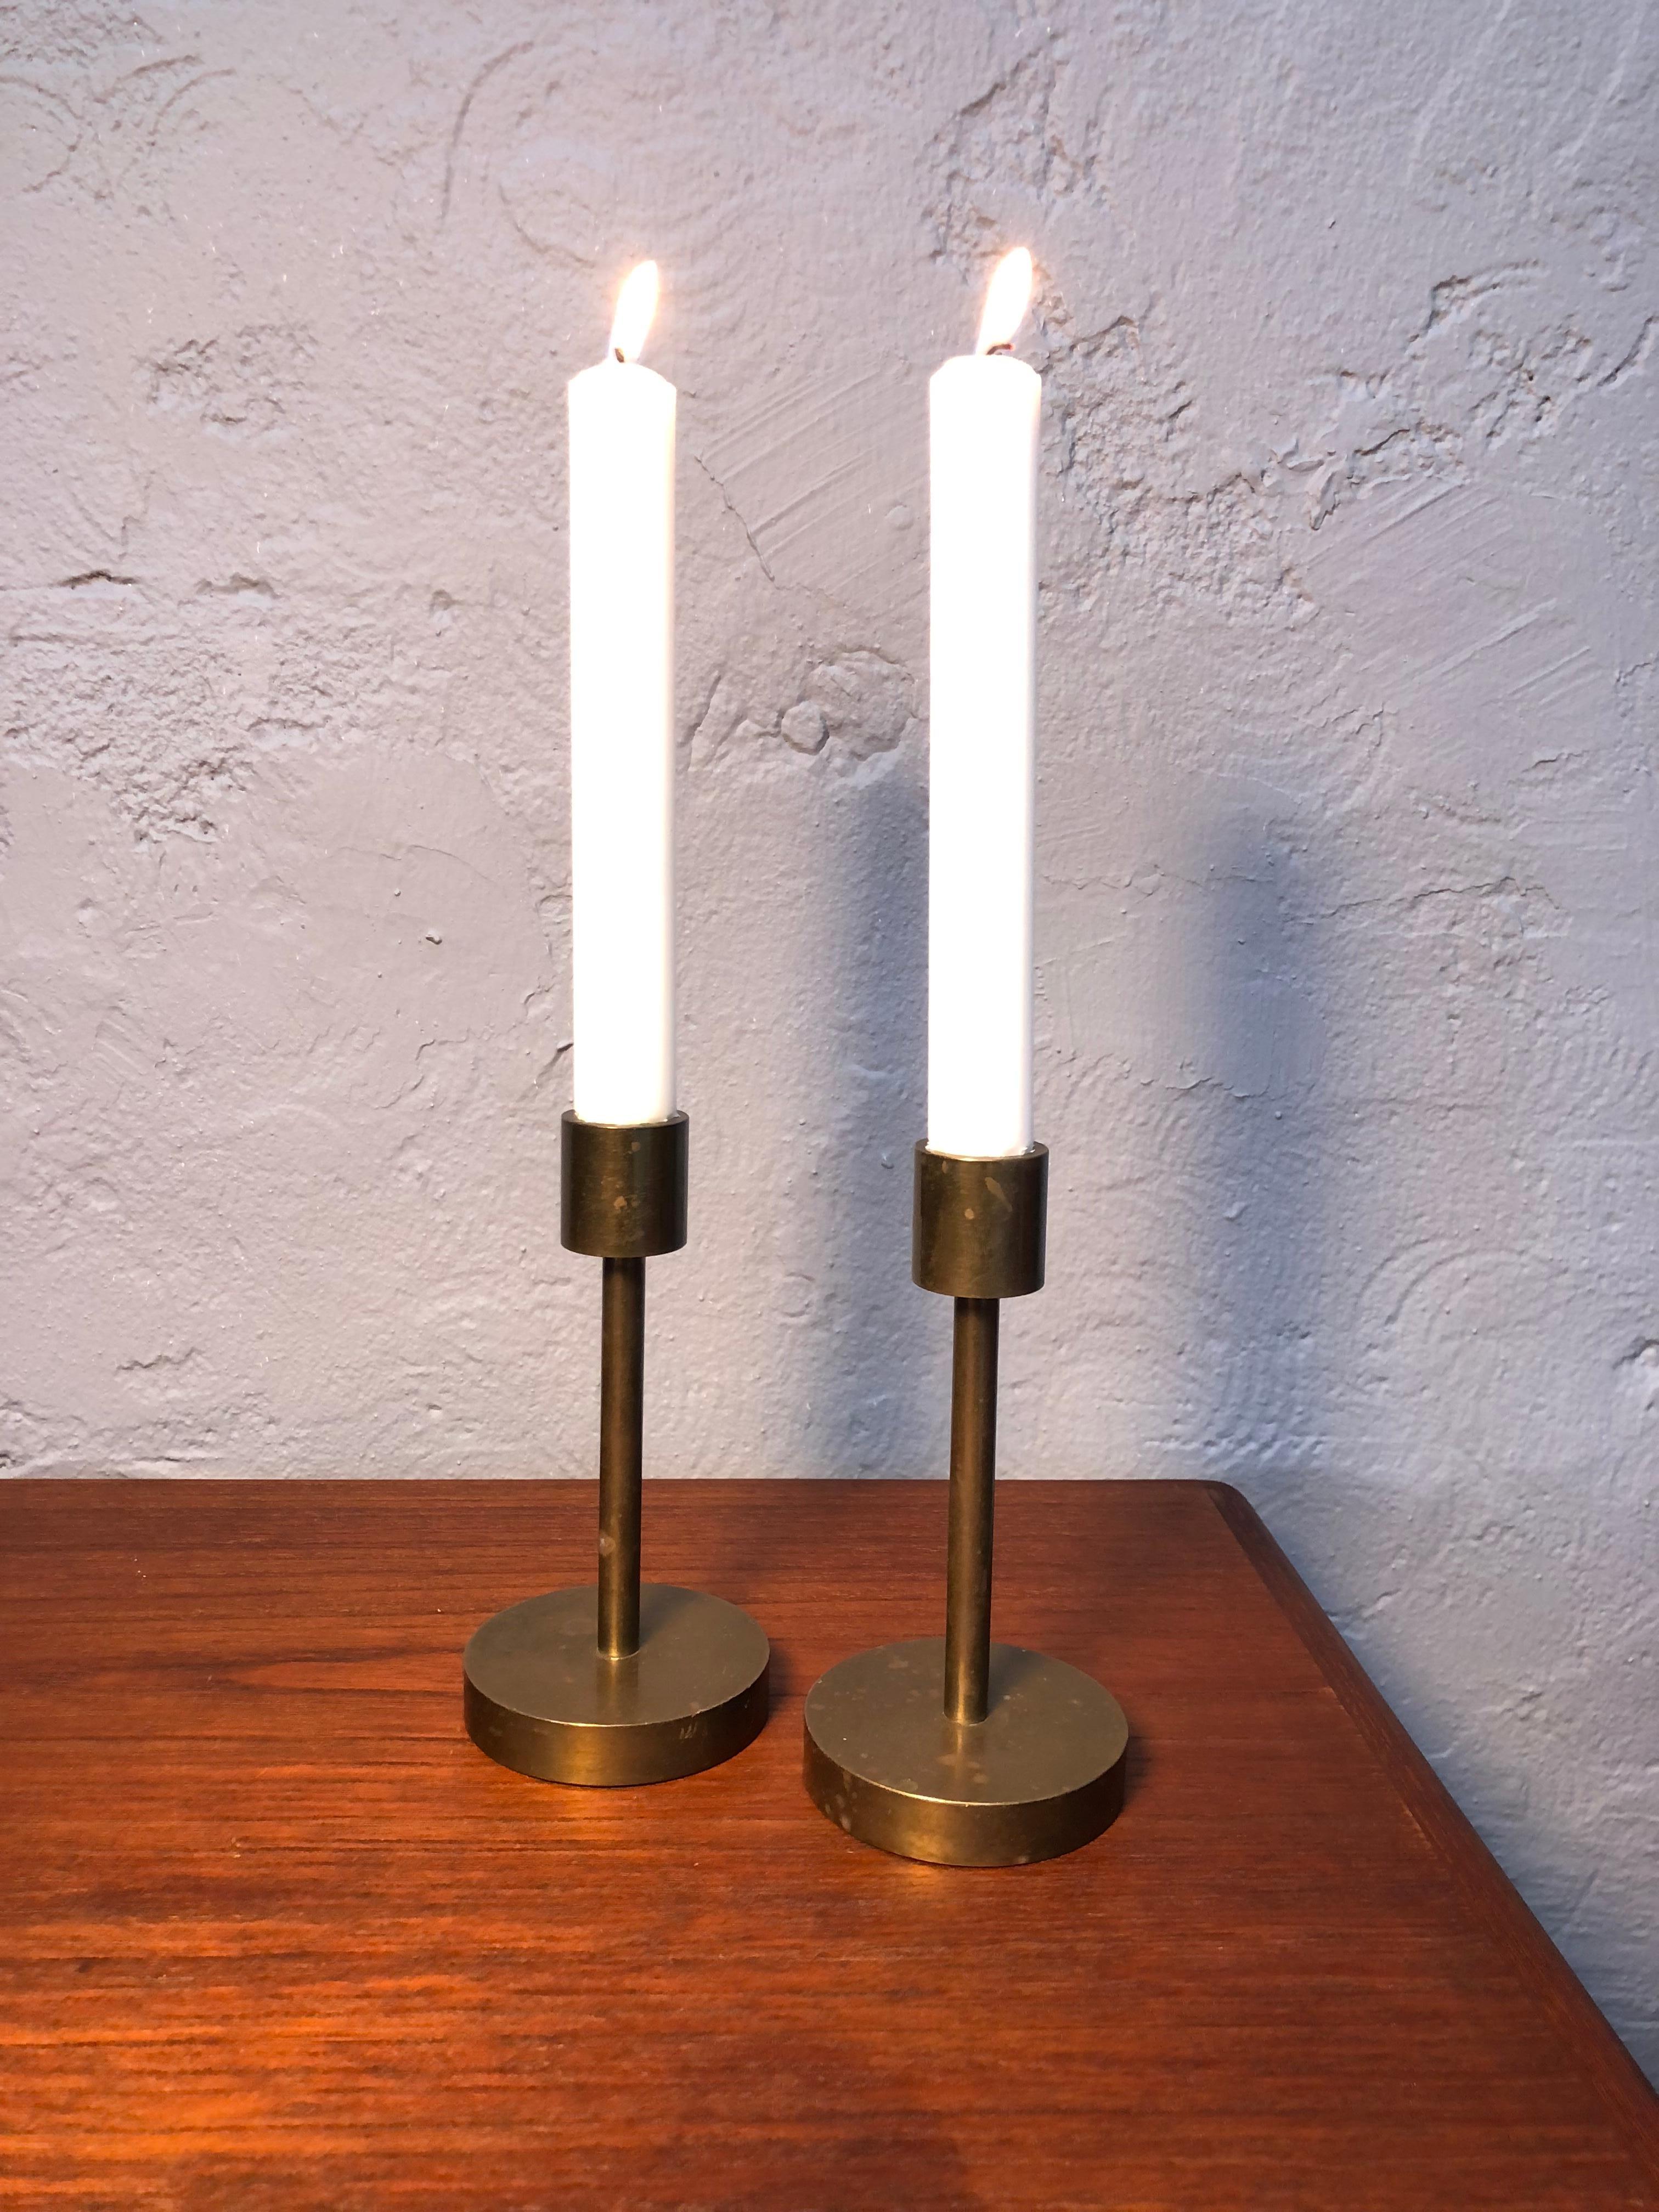 A mid-century pair of solid brass candle holders. 
Designer unknown but in the manner of Ilse D. Ammonsen. 
Lovely simplistic period design.
In unpolished condition with age related wear and patina. 
Can be polished if so desired. 
Responsible